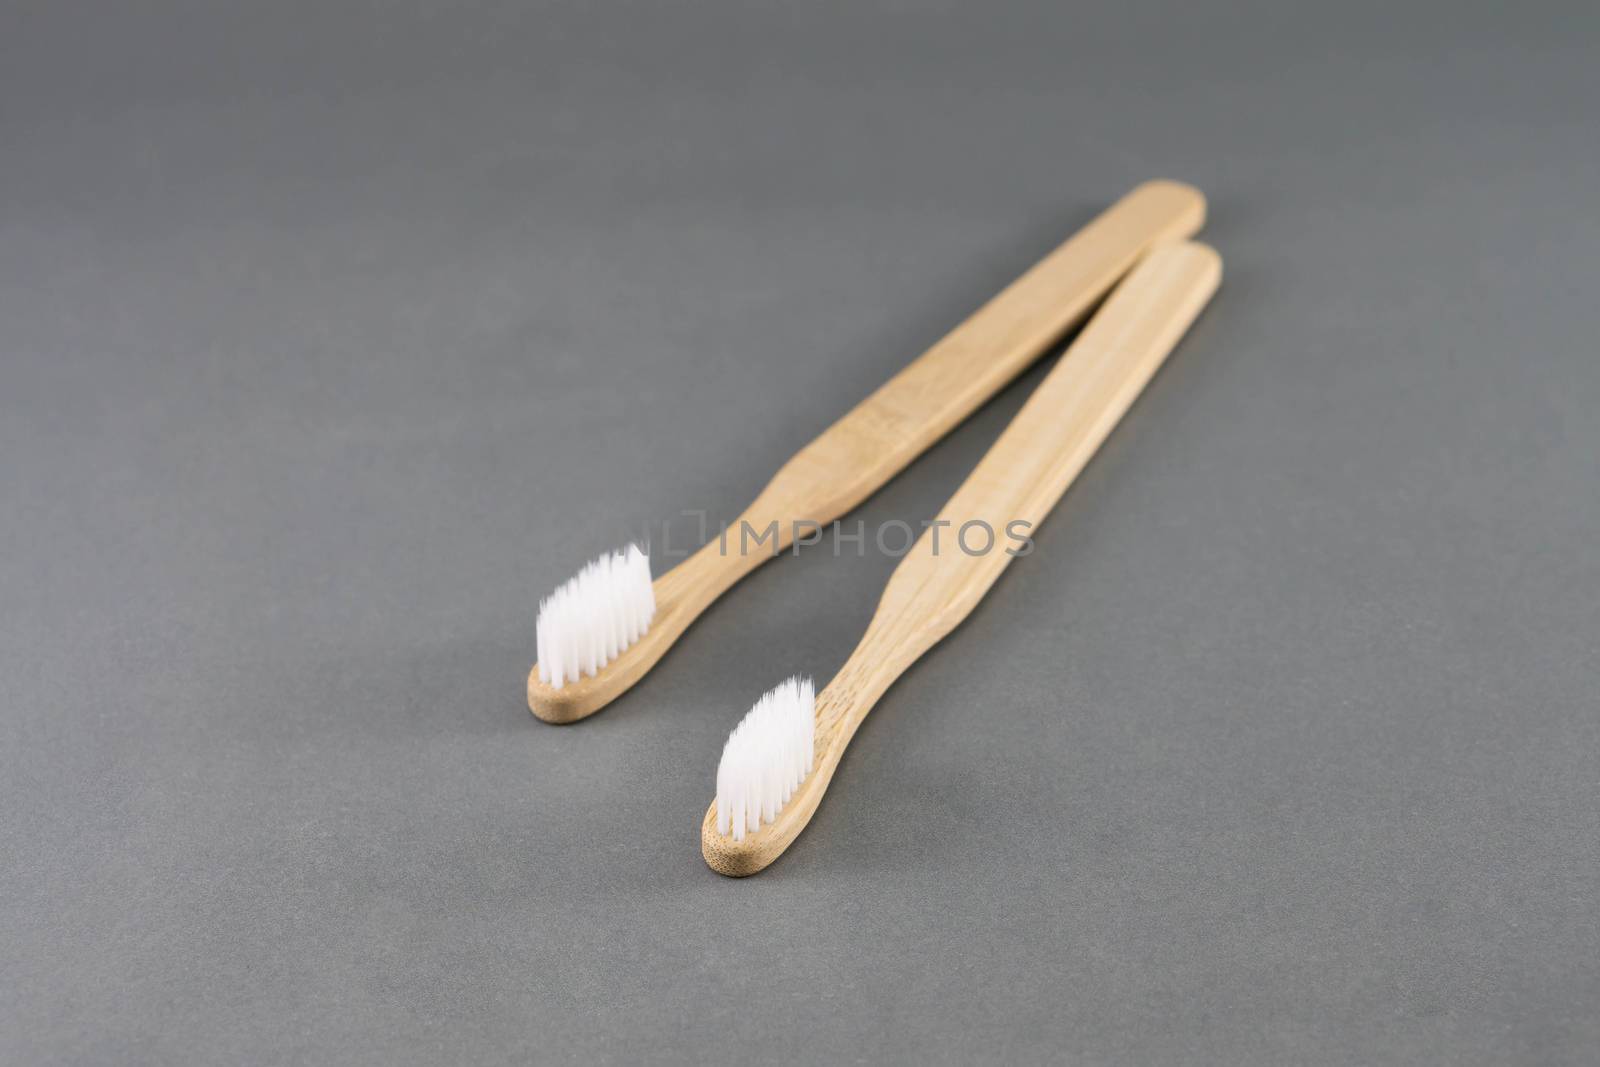 Close up wooden toothbrush on grey background, selective focus